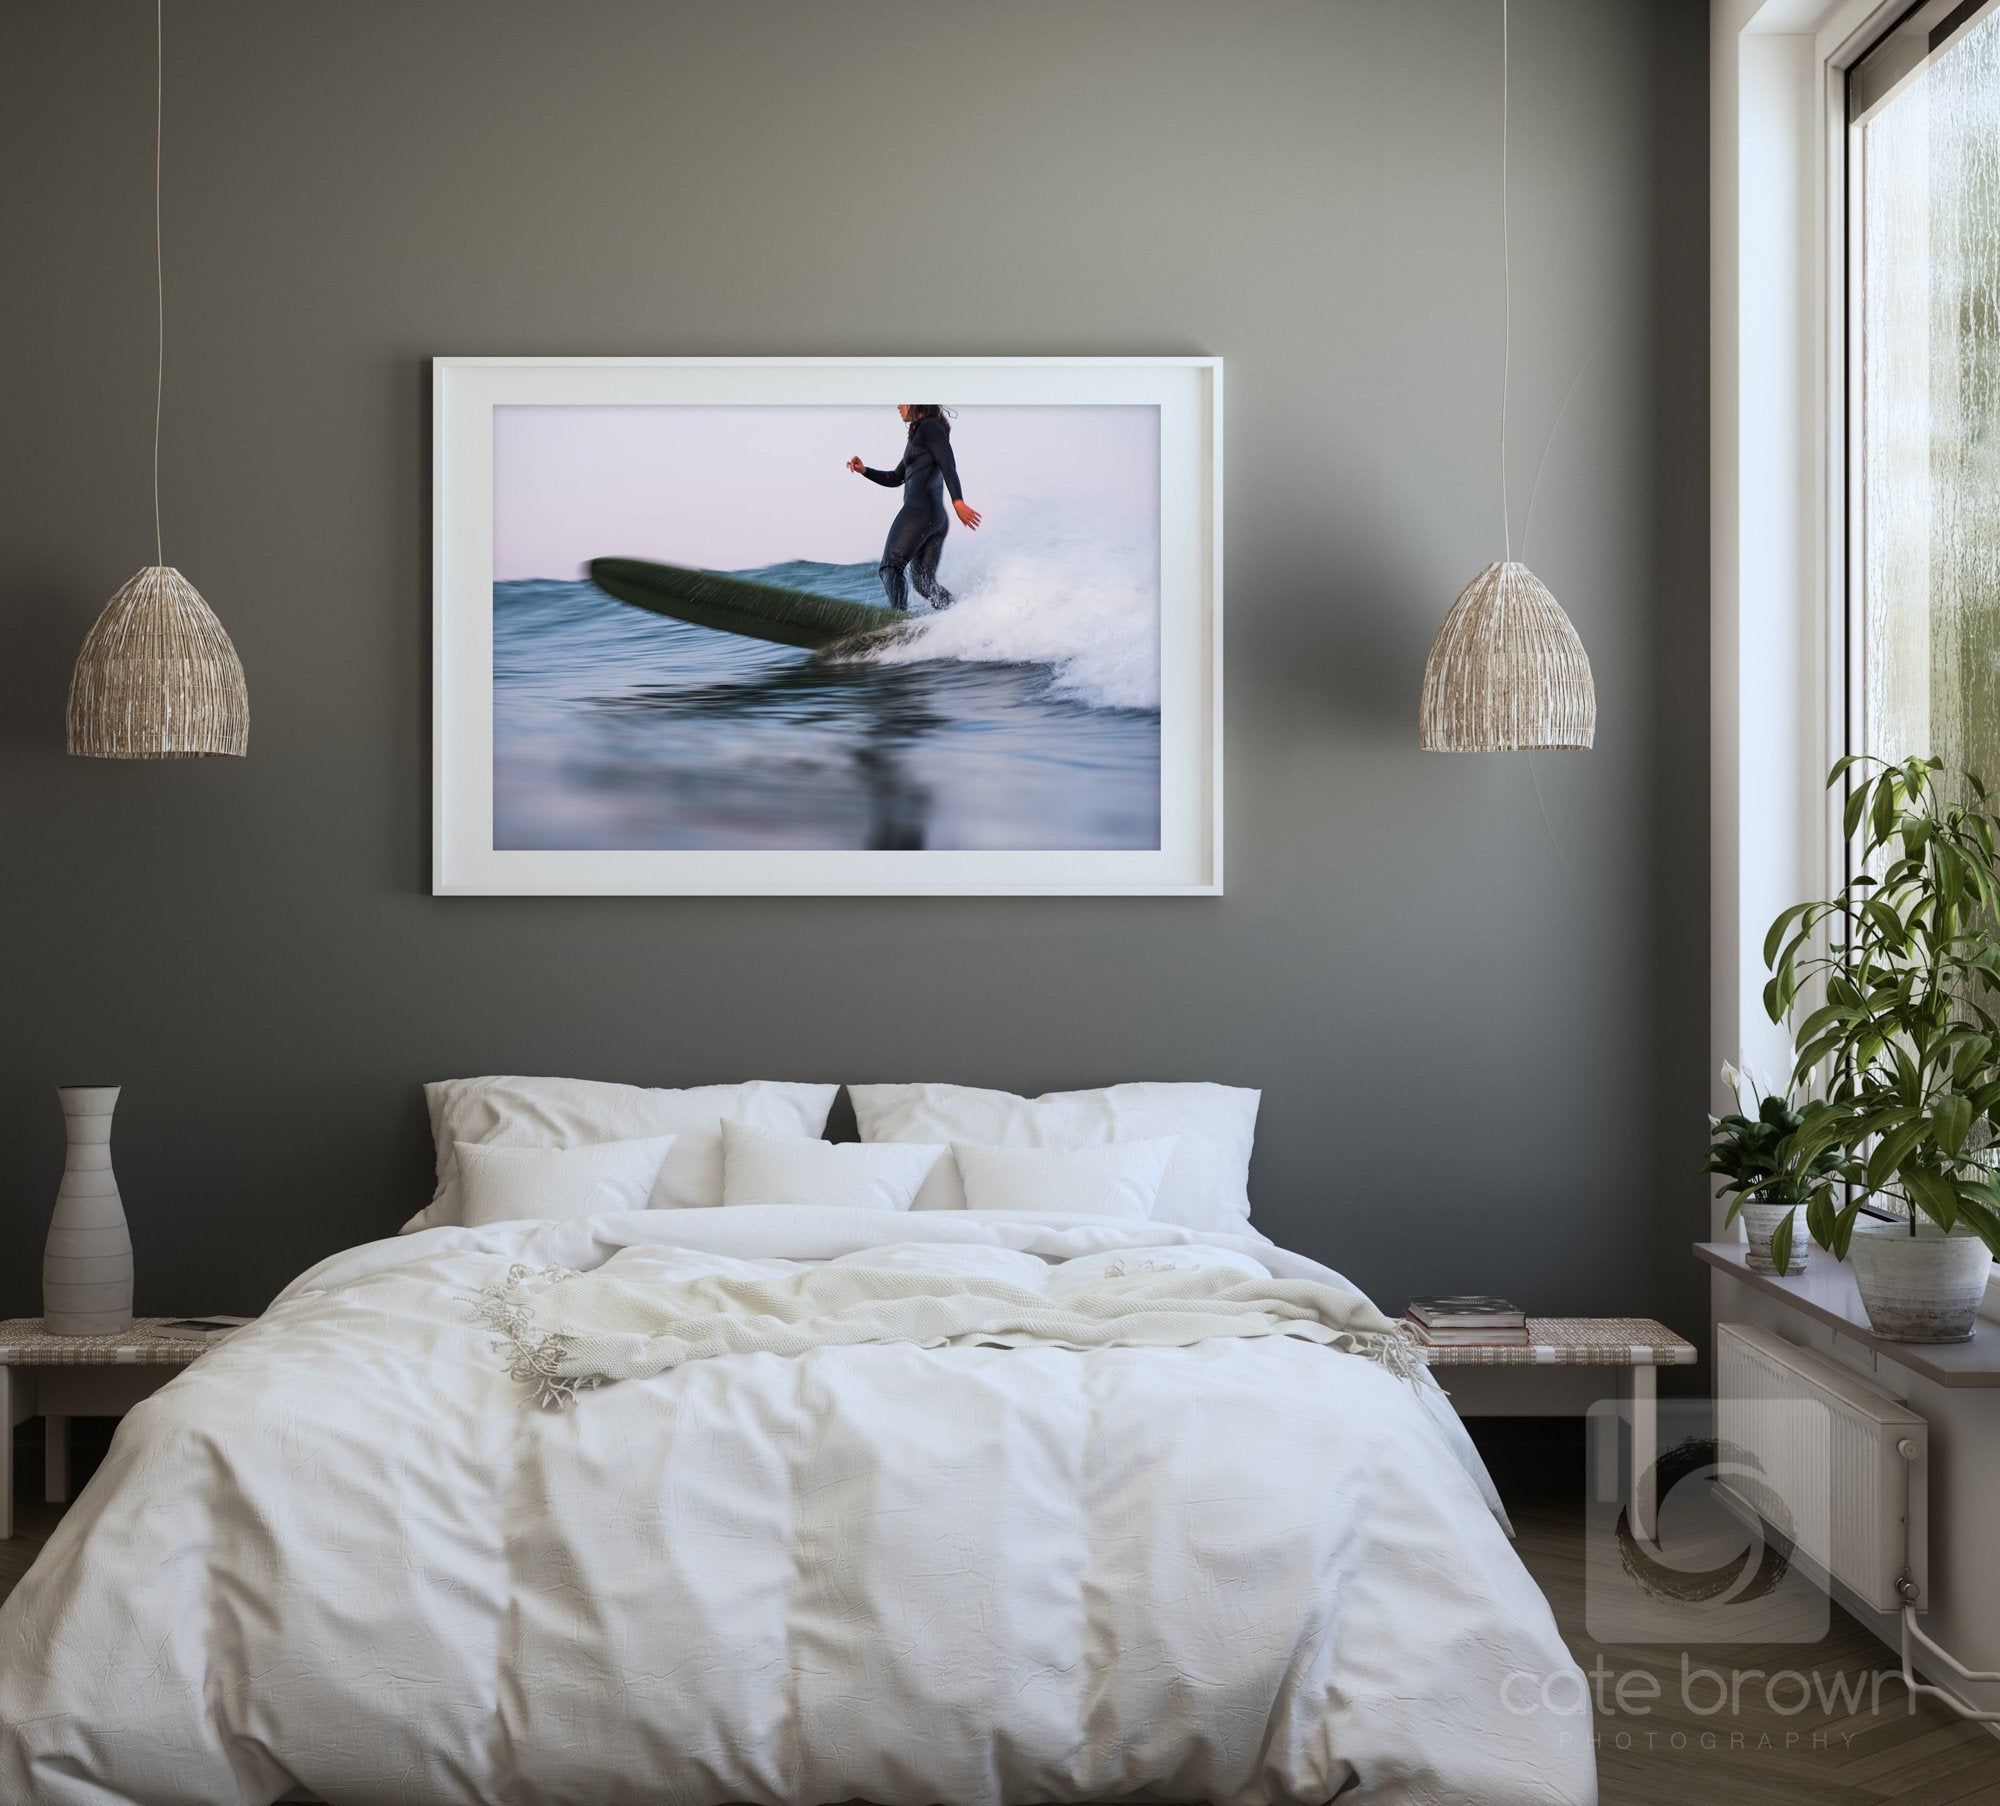 Cate Brown Photo Claire at Dusk  //  Surf Photography Made to Order Ocean Fine Art